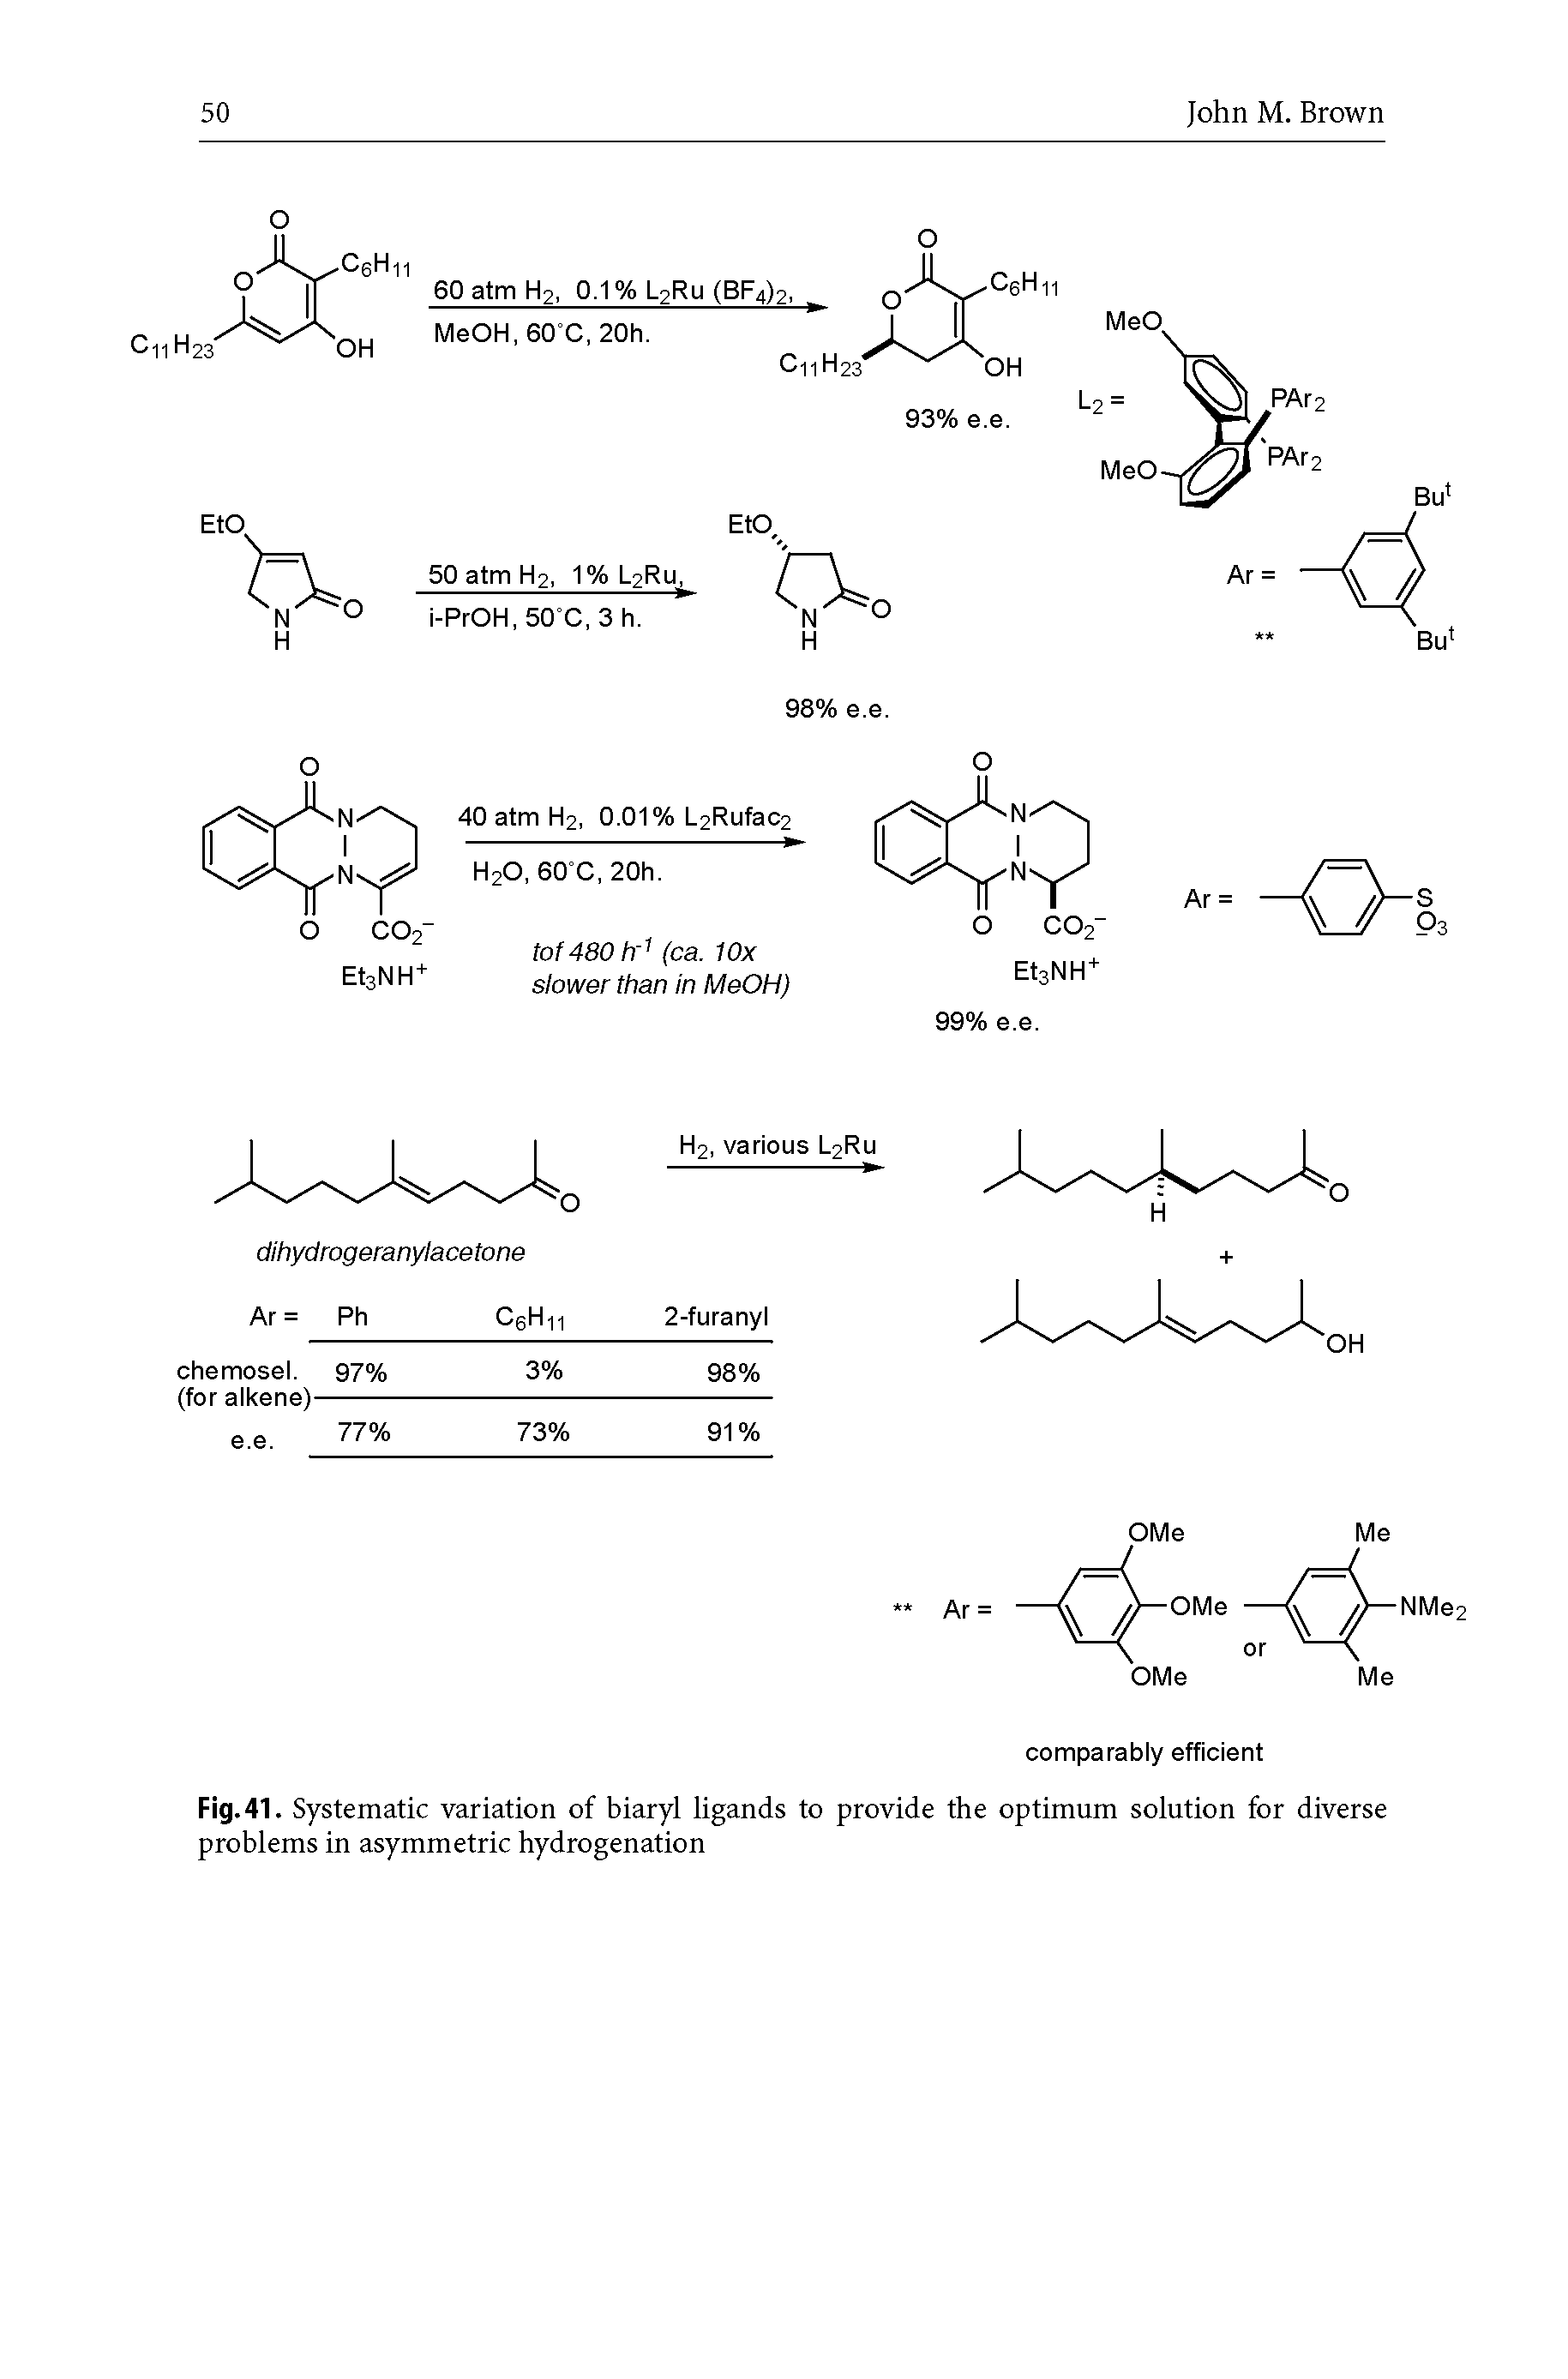 Fig. 41. Systematic variation of biaryl ligands to provide the optimum solution for diverse problems in asymmetric hydrogenation...